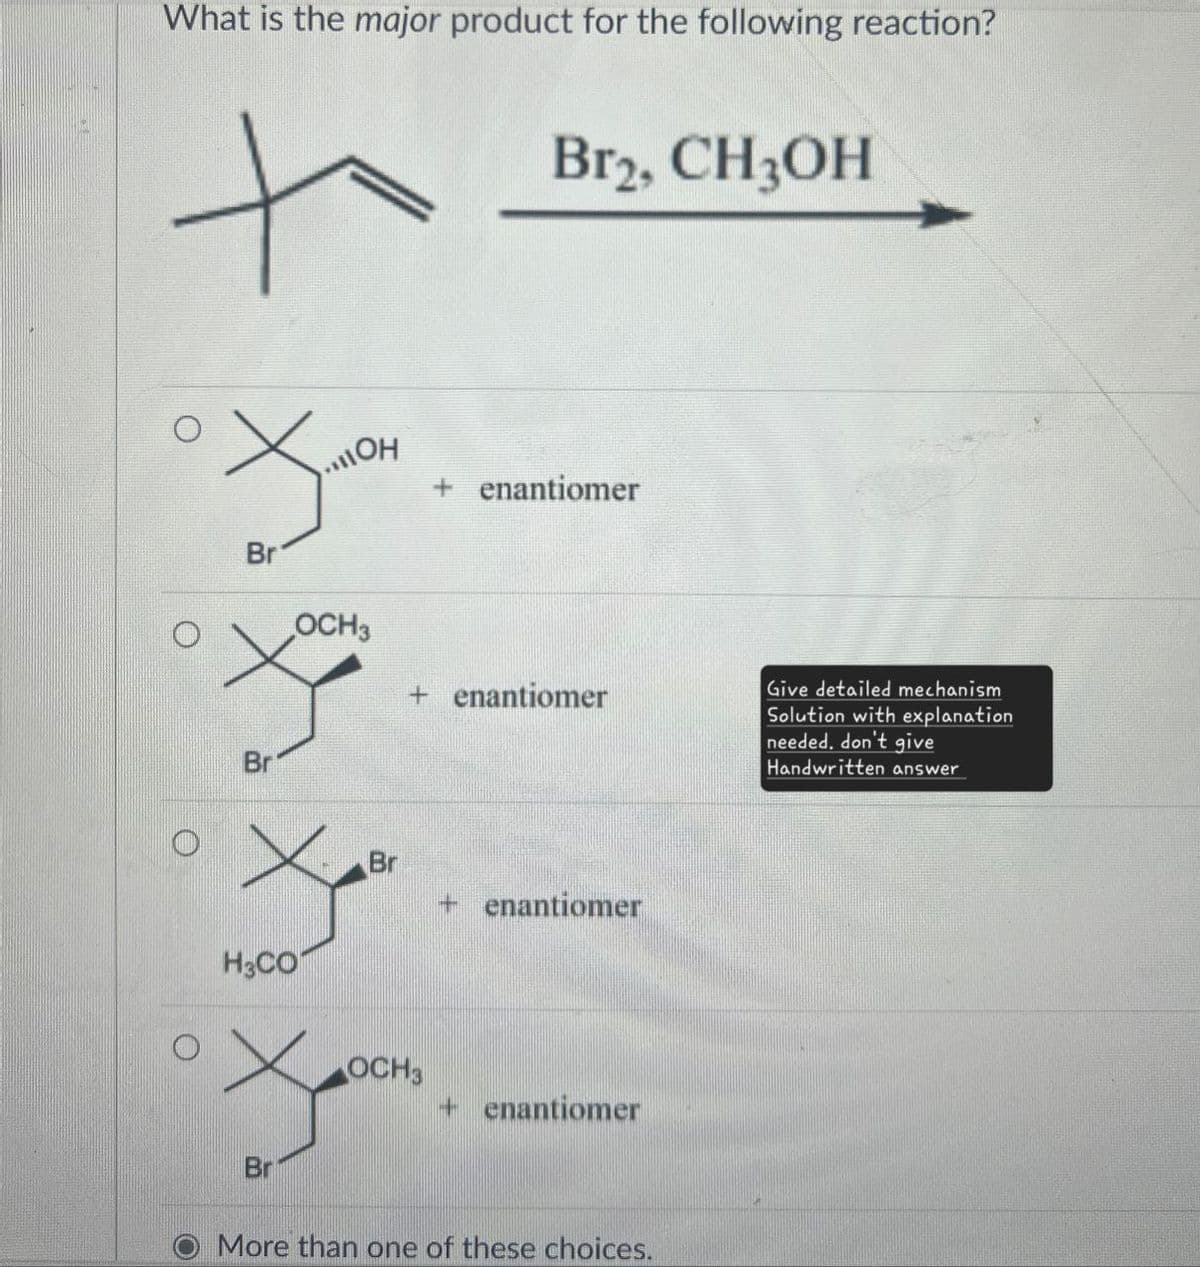 What is the major product for the following reaction?
+
Br2, CH3OH
Br
110H
OCH3
+ enantiomer
+ enantiomer
Br
H3CO
Br
Br
+ enantiomer
OCH3
+ enantiomer
More than one of these choices.
Give detailed mechanism
Solution with explanation
needed. don't give
Handwritten answer